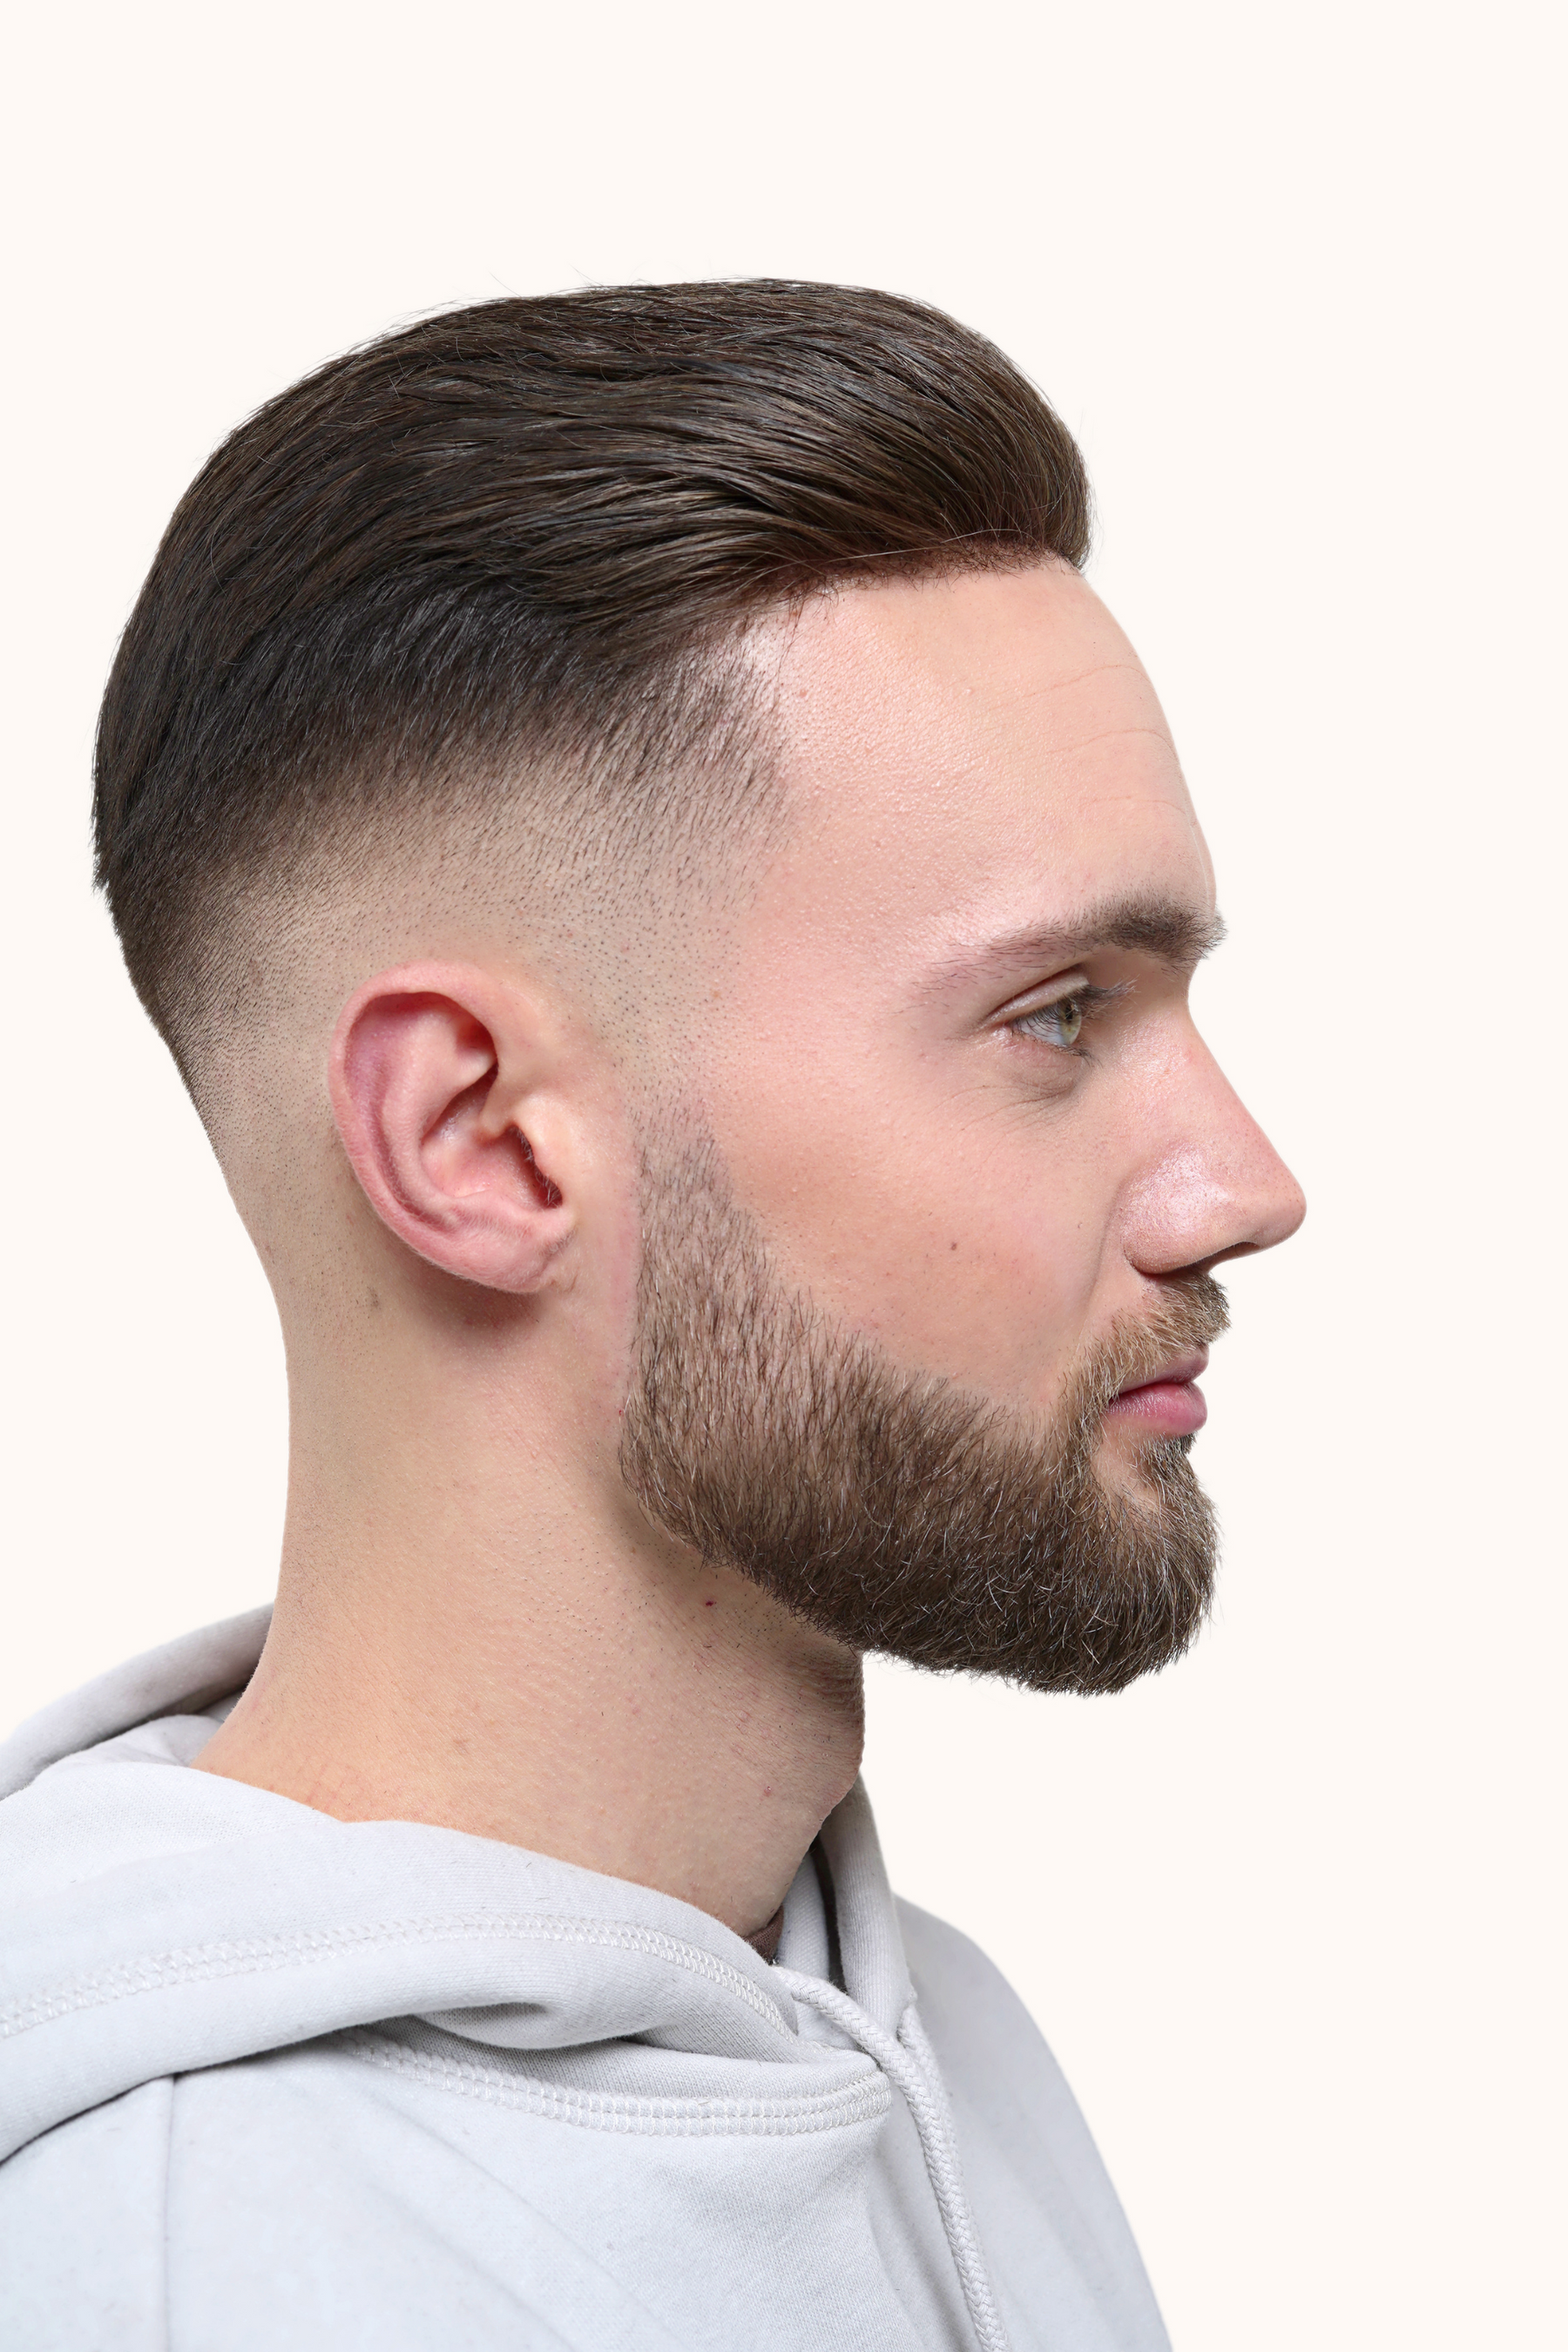 Hair Replacement Systems For Men | Classic Slick Back Style